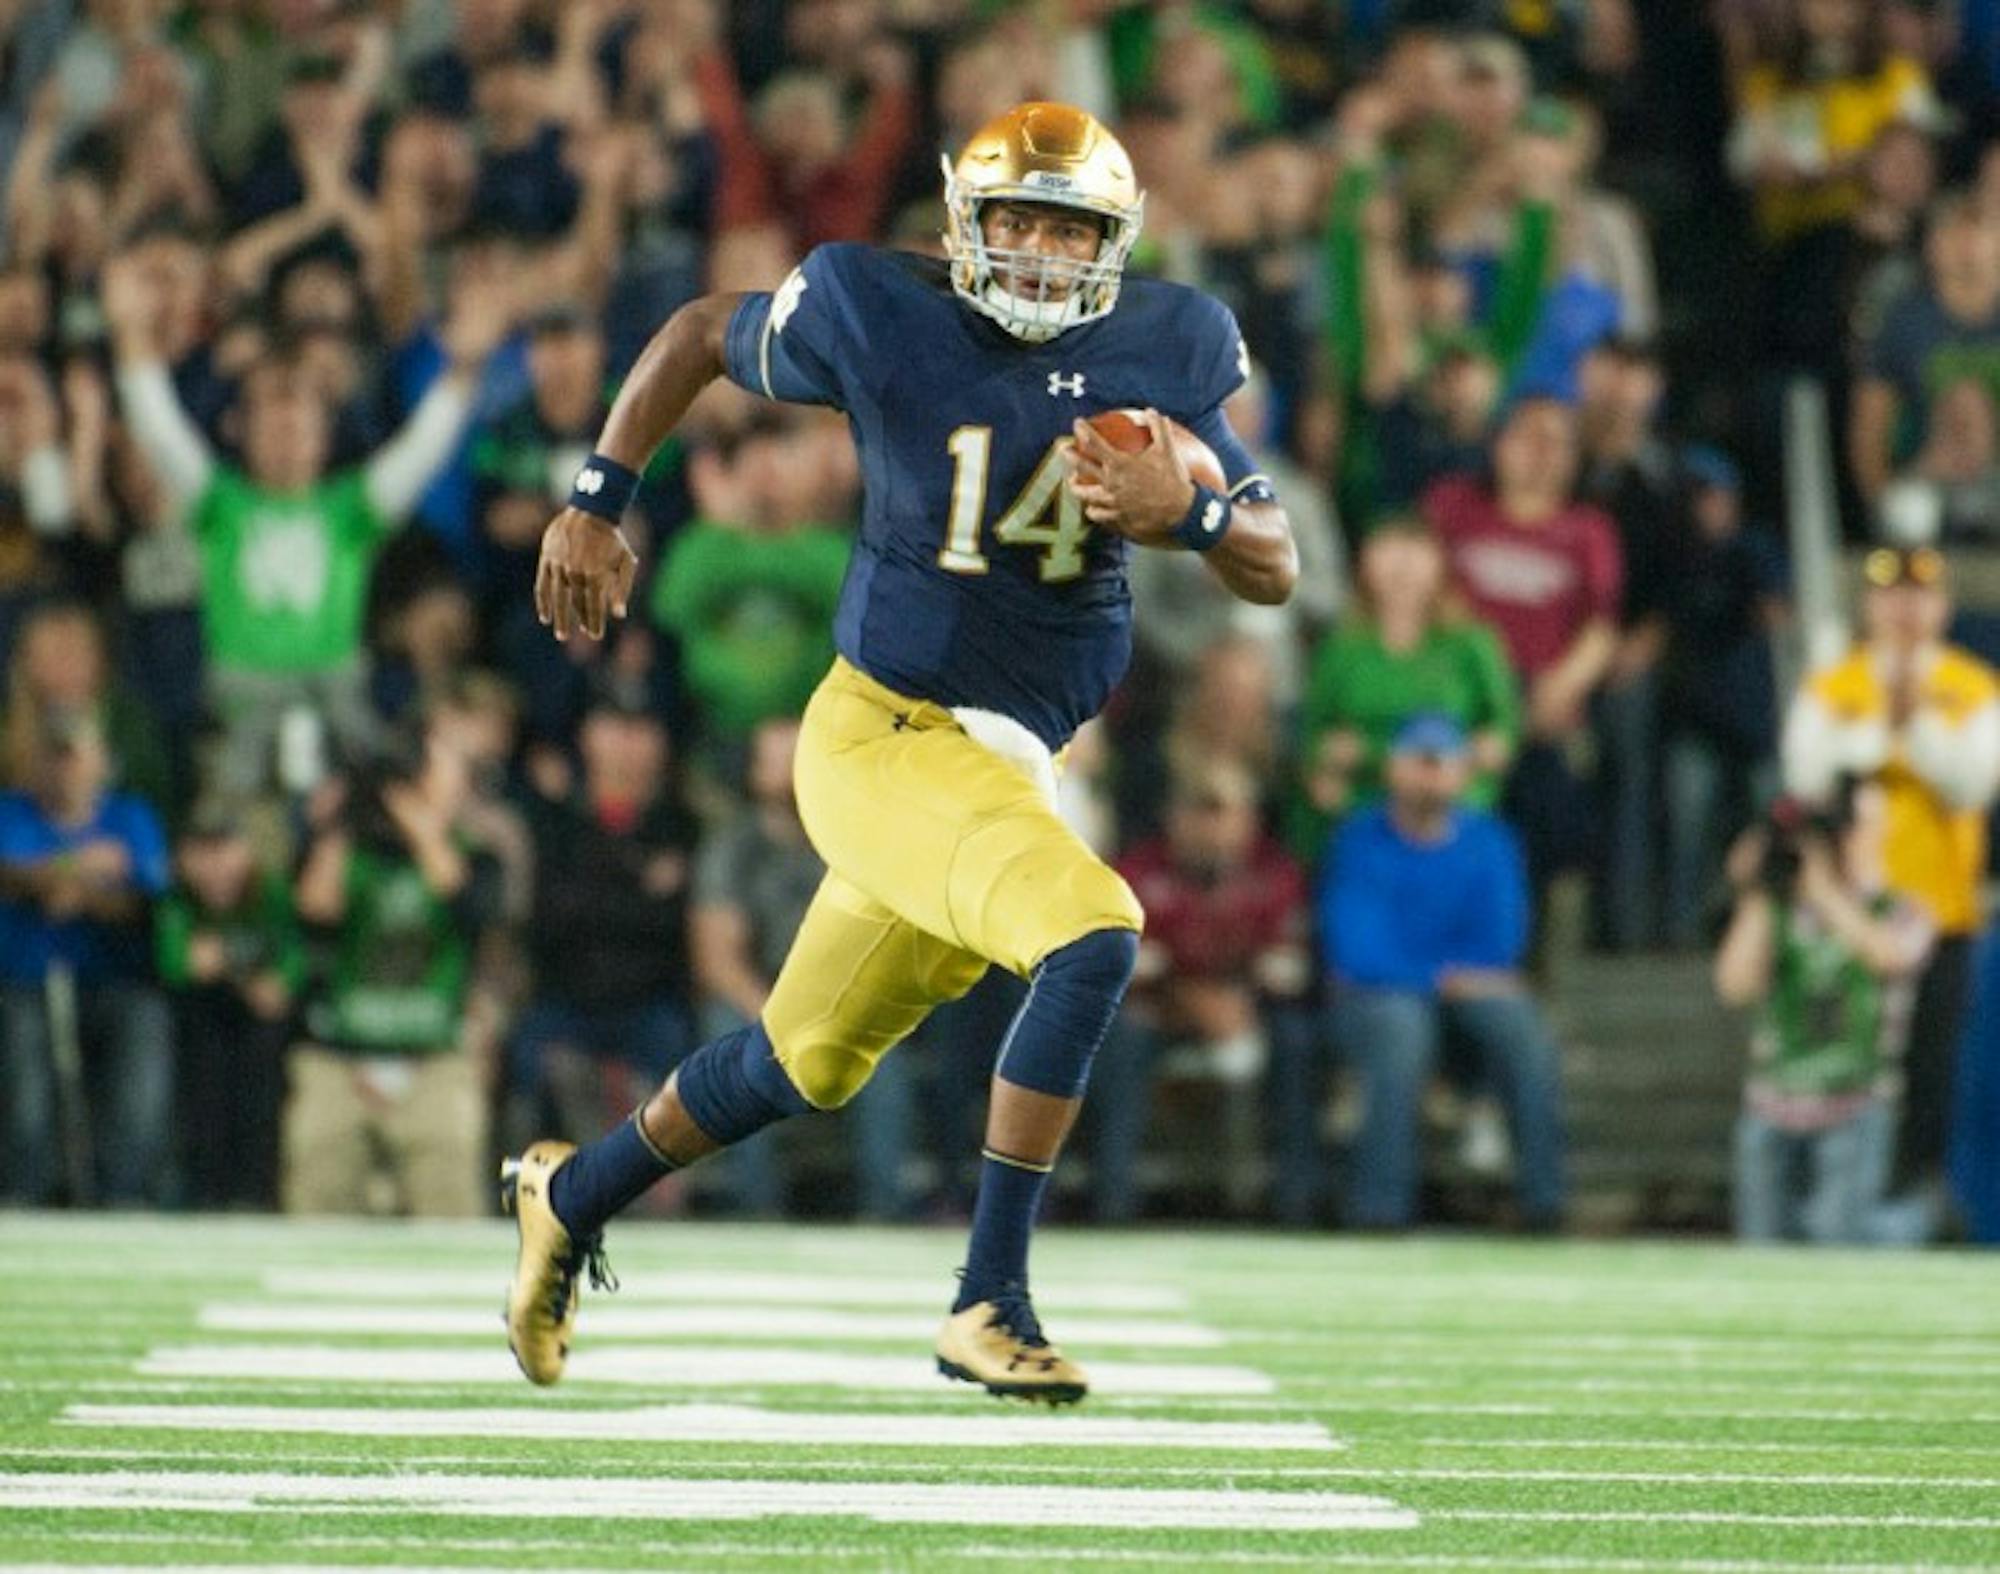 DeShone Kizer tucks the ball and takes off toward the sideline during Notre Dame’s loss to Stanford. Kizer finished the game with 154 yards on 14-for-26 passing. He added another 83 yards and a touchdown on 11 rushing attempts, including a 49-yard scamper.